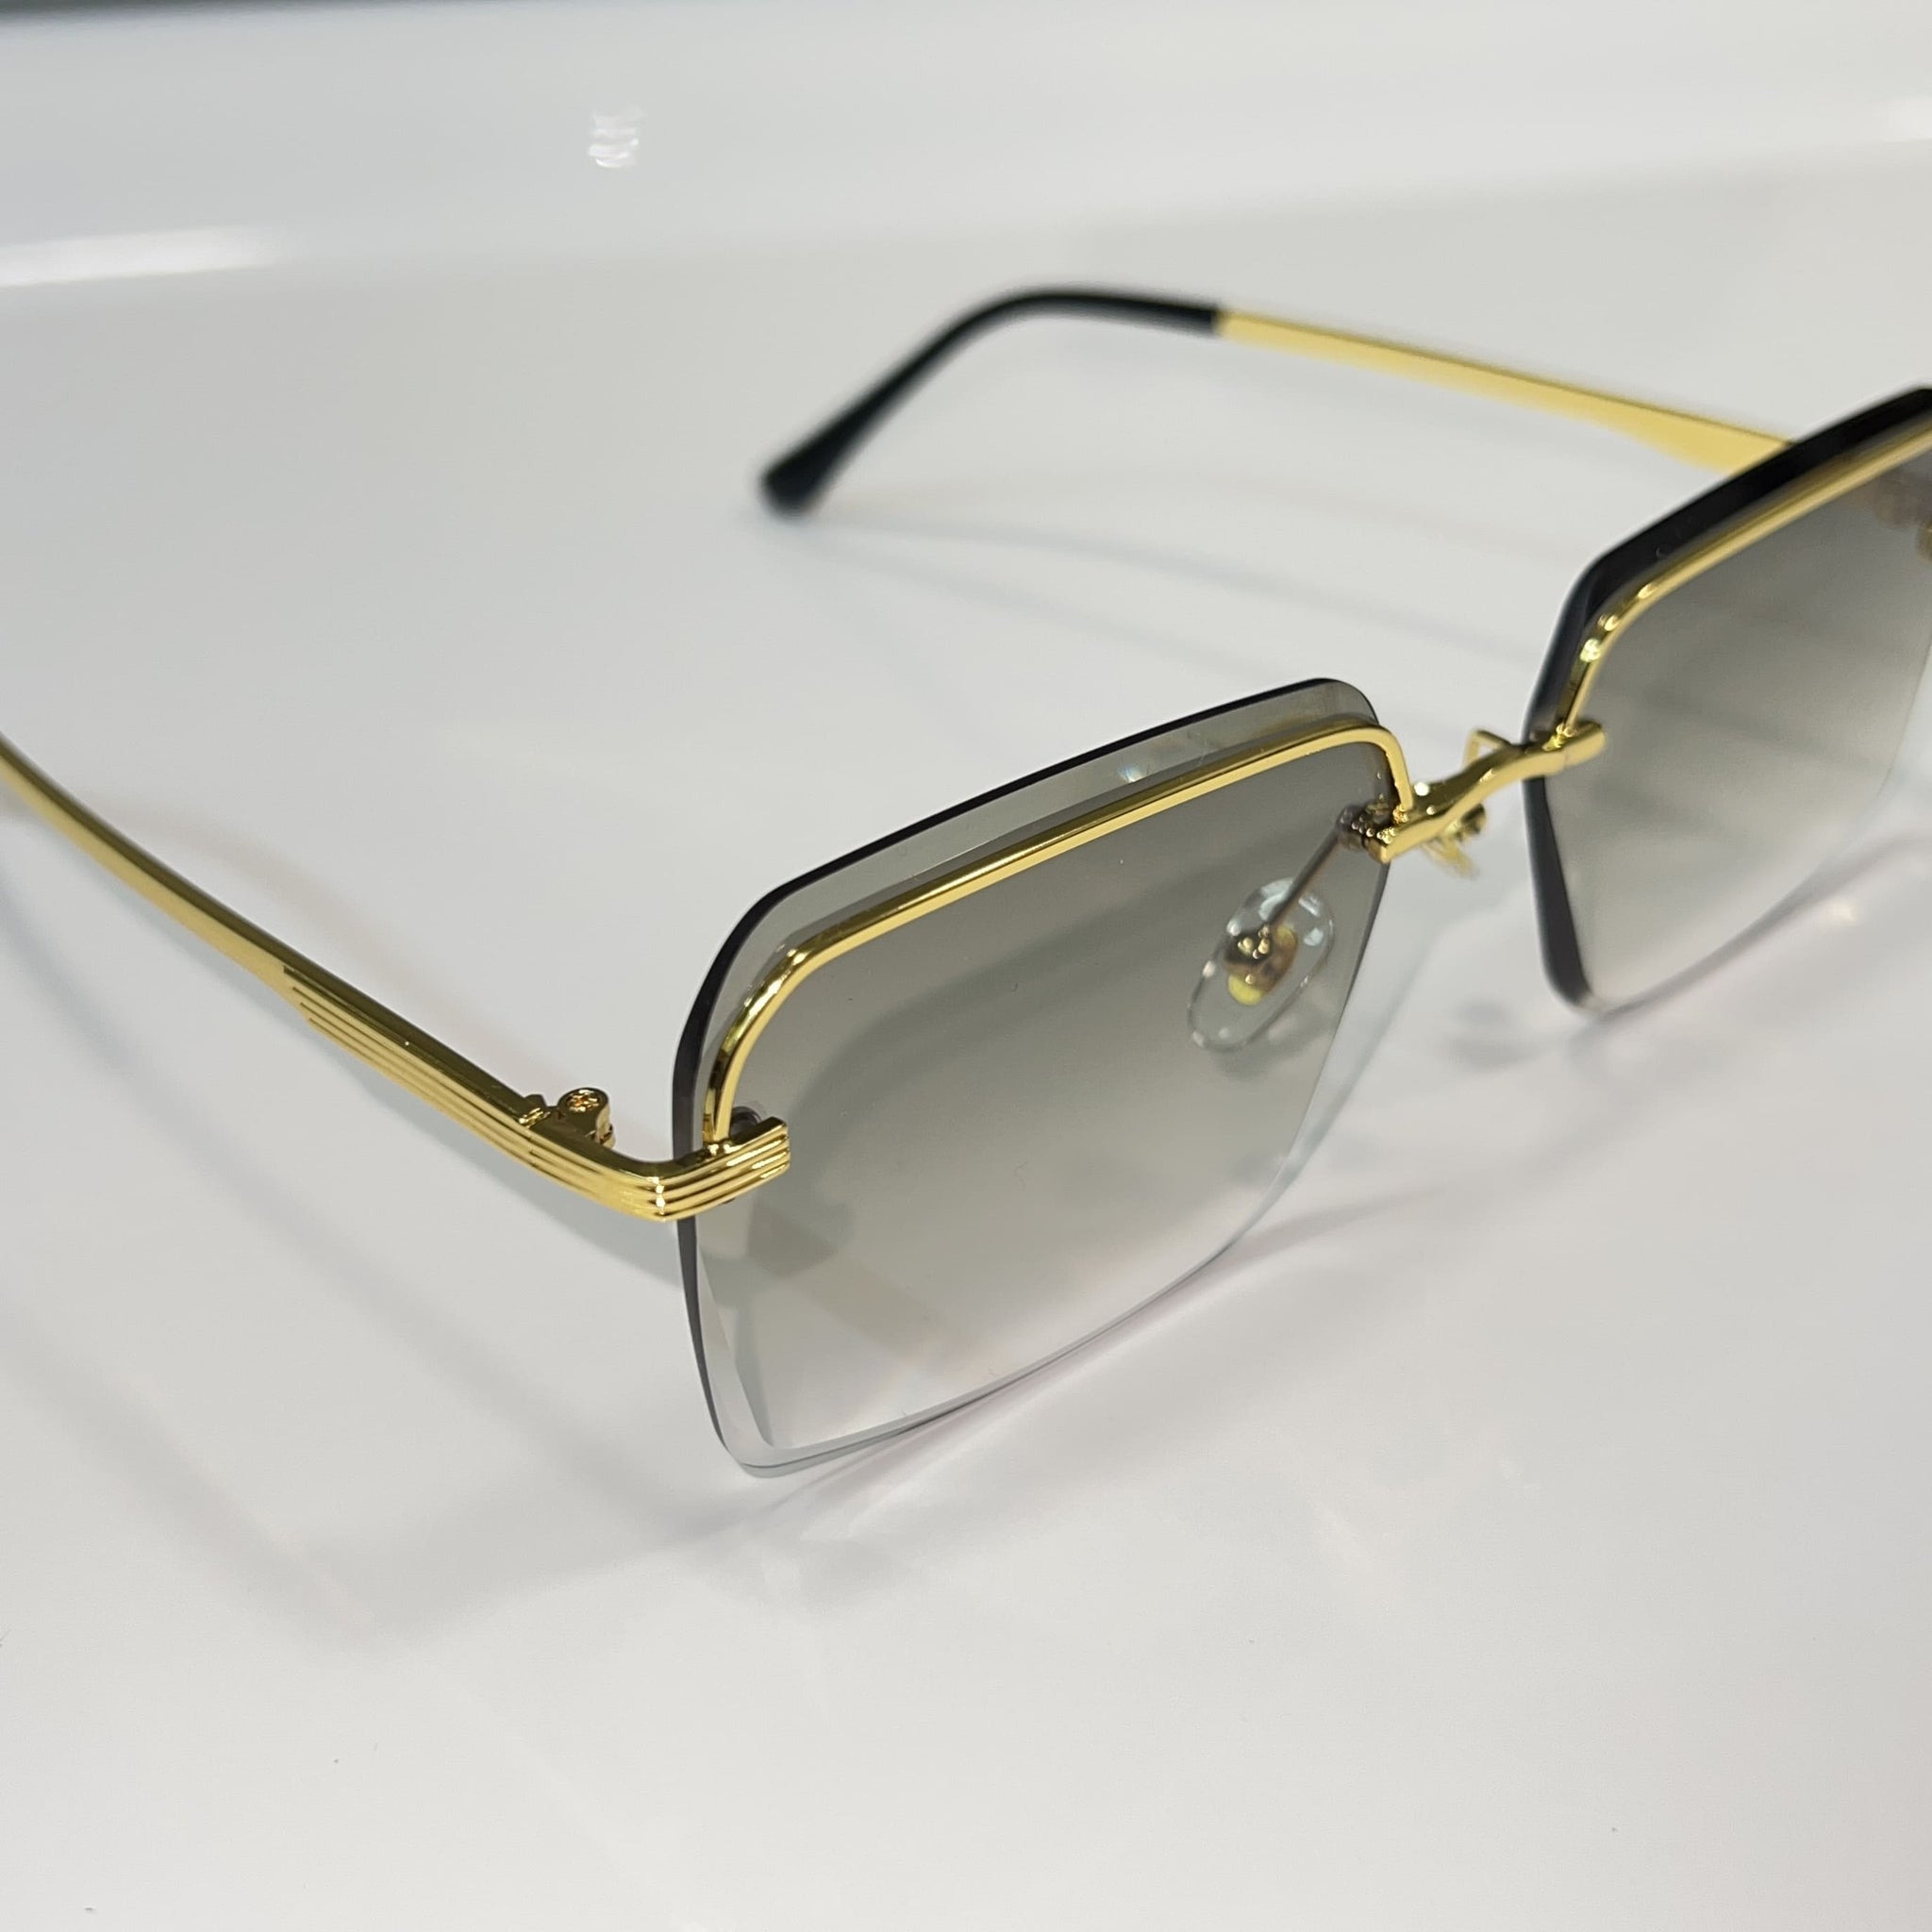 Invincible Glasses - 14k gold plated - Green / Grey Shade - Sehgal Glasses